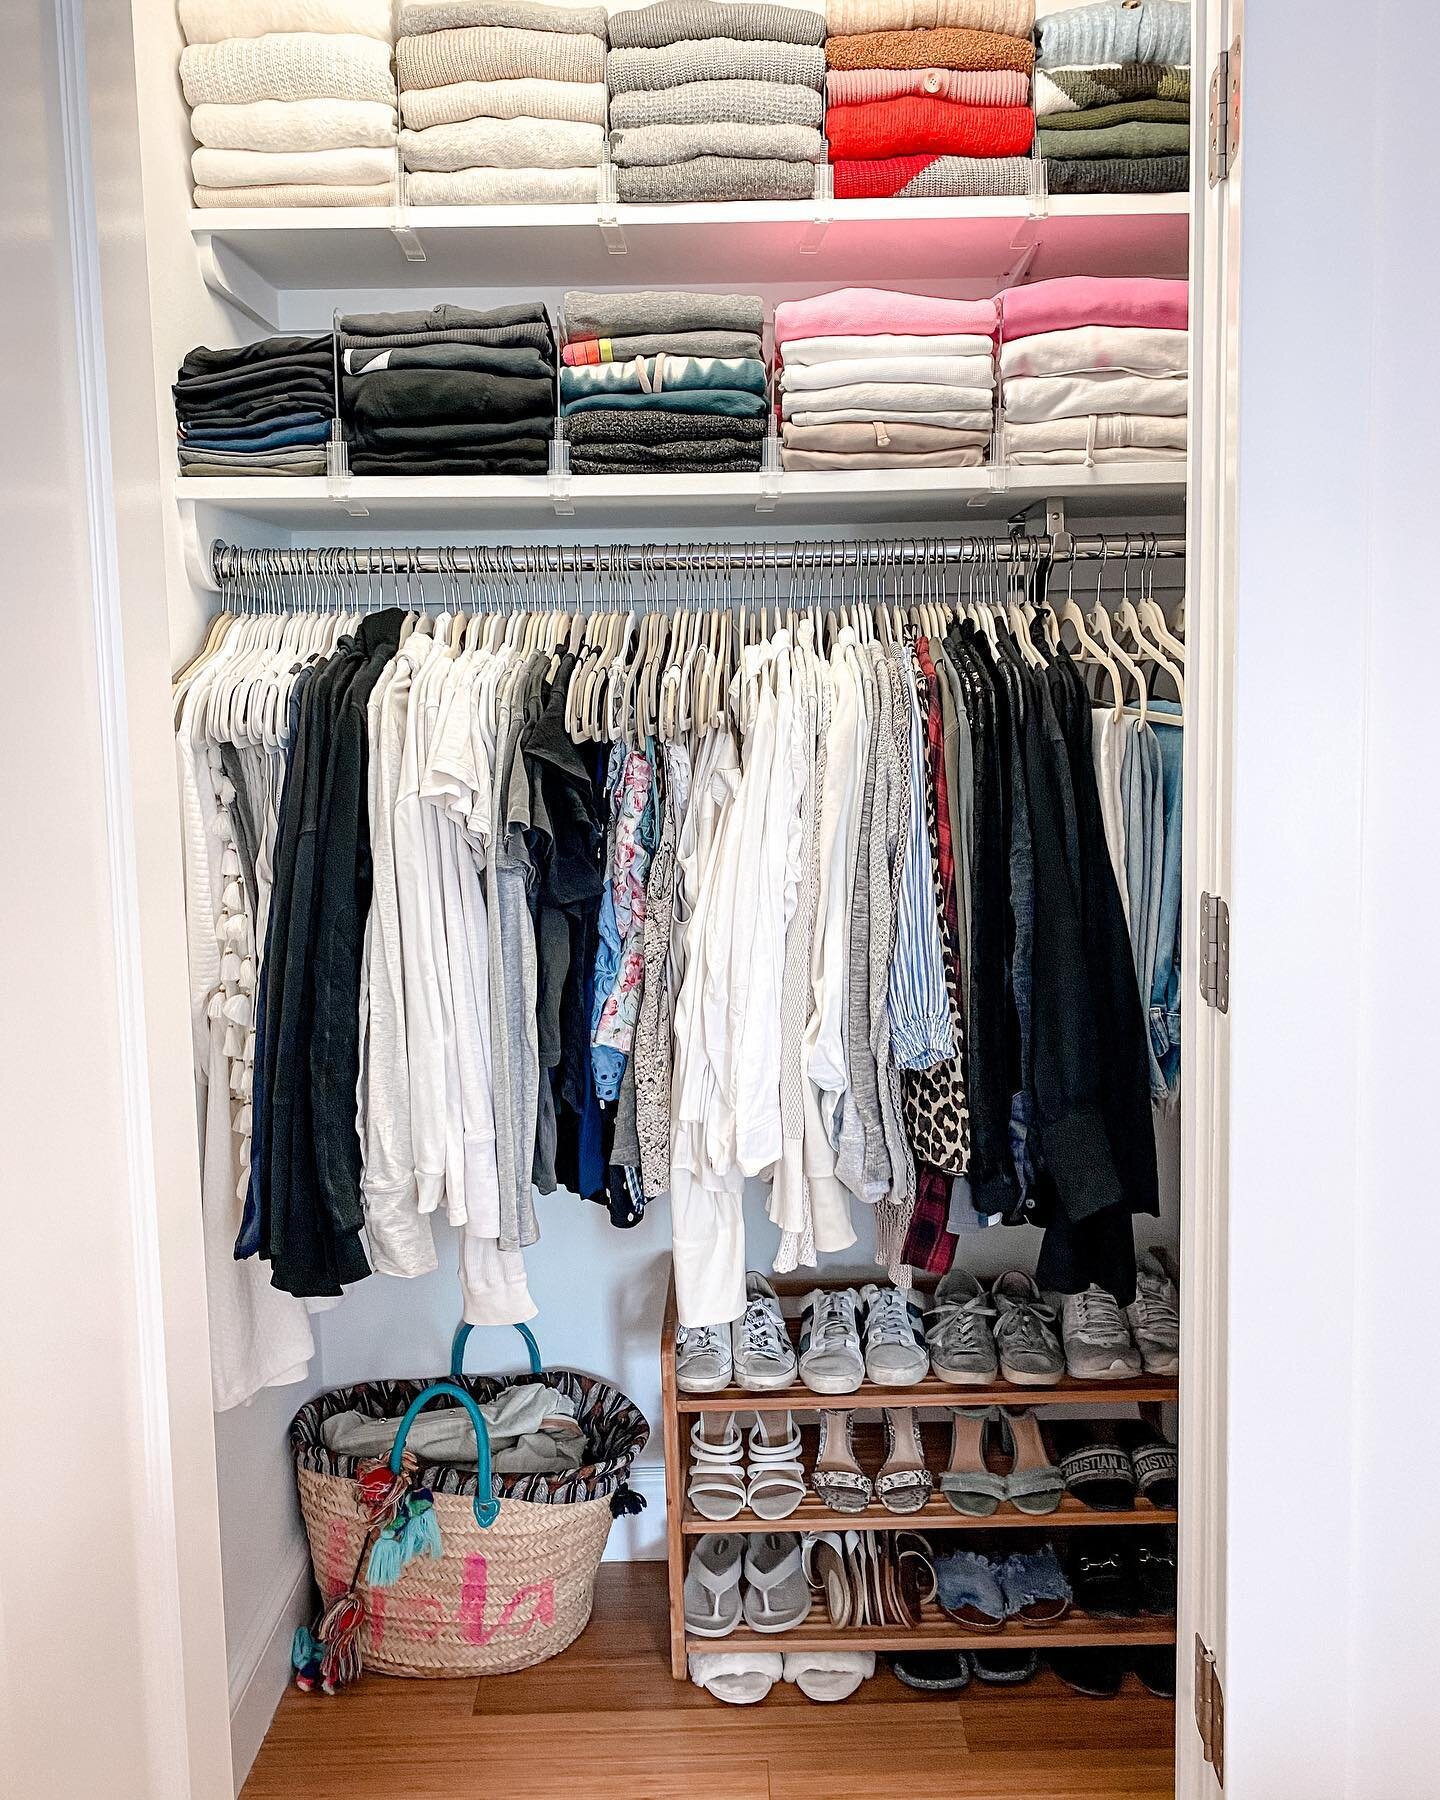 Sharing a more classic nyc closet for once andd what I did to the space:

1) Editing and folding got a very divided wardrobe (between 2 closets) into one space

2) We had so many different packs of neutral hangers in this closet. In a perfect world, 